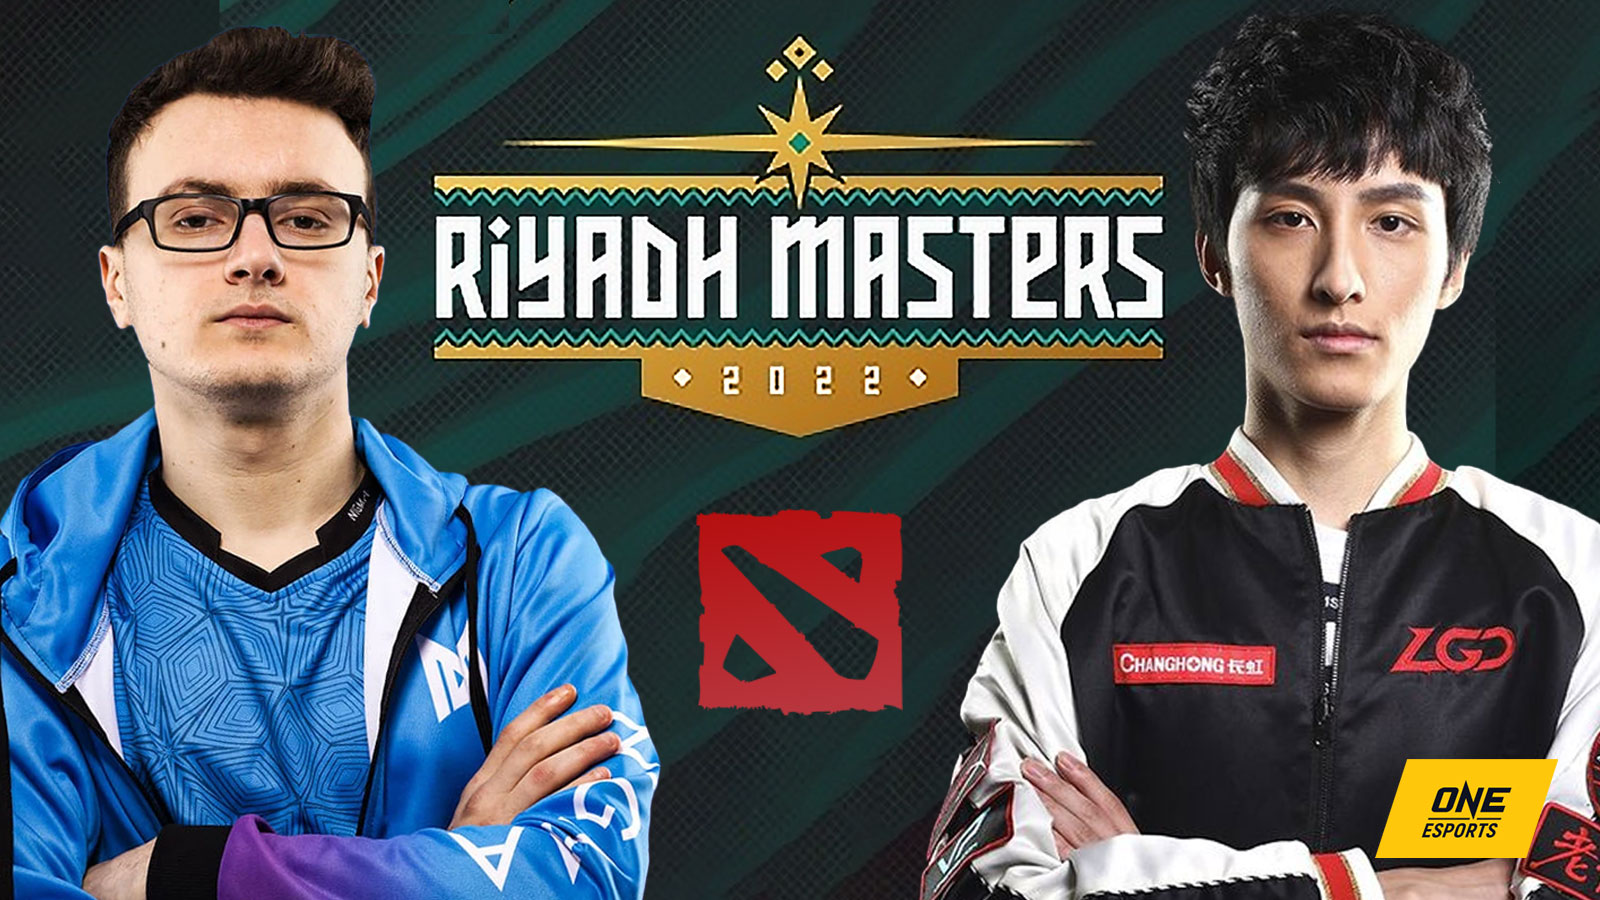 Riyadh Masters Dota 2 2022 Schedule, results, format, teams, where to